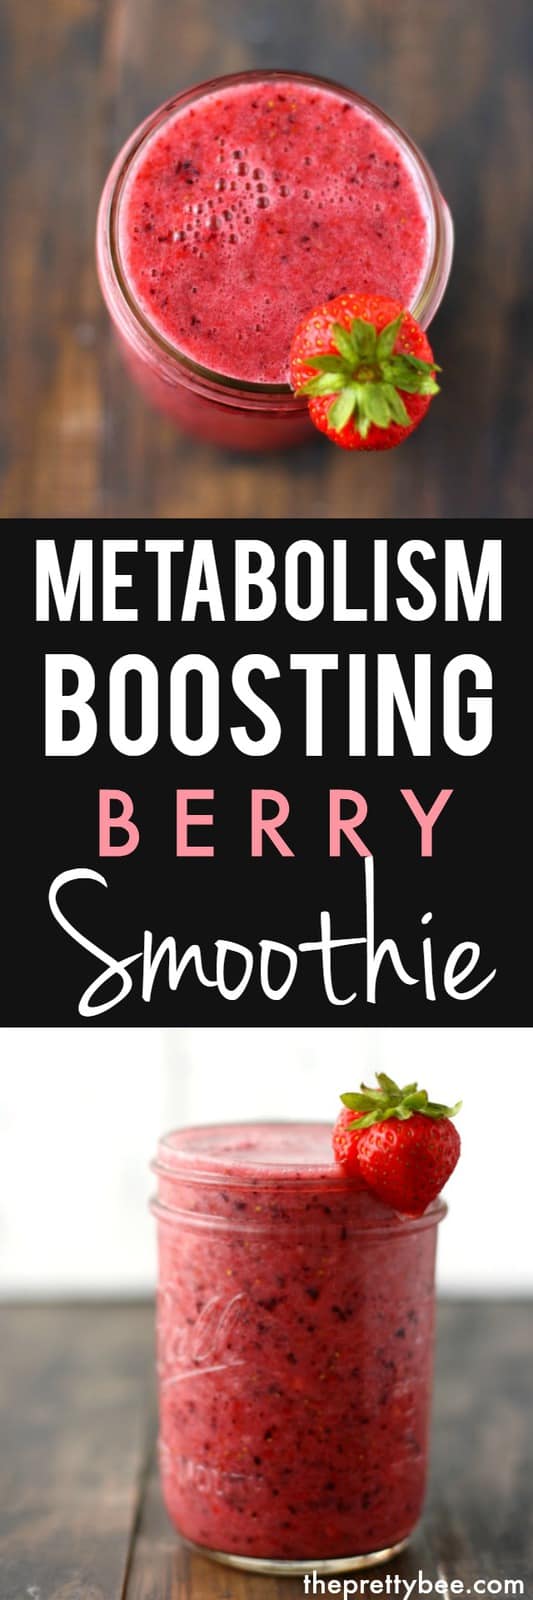 berry smoothie for metabolism